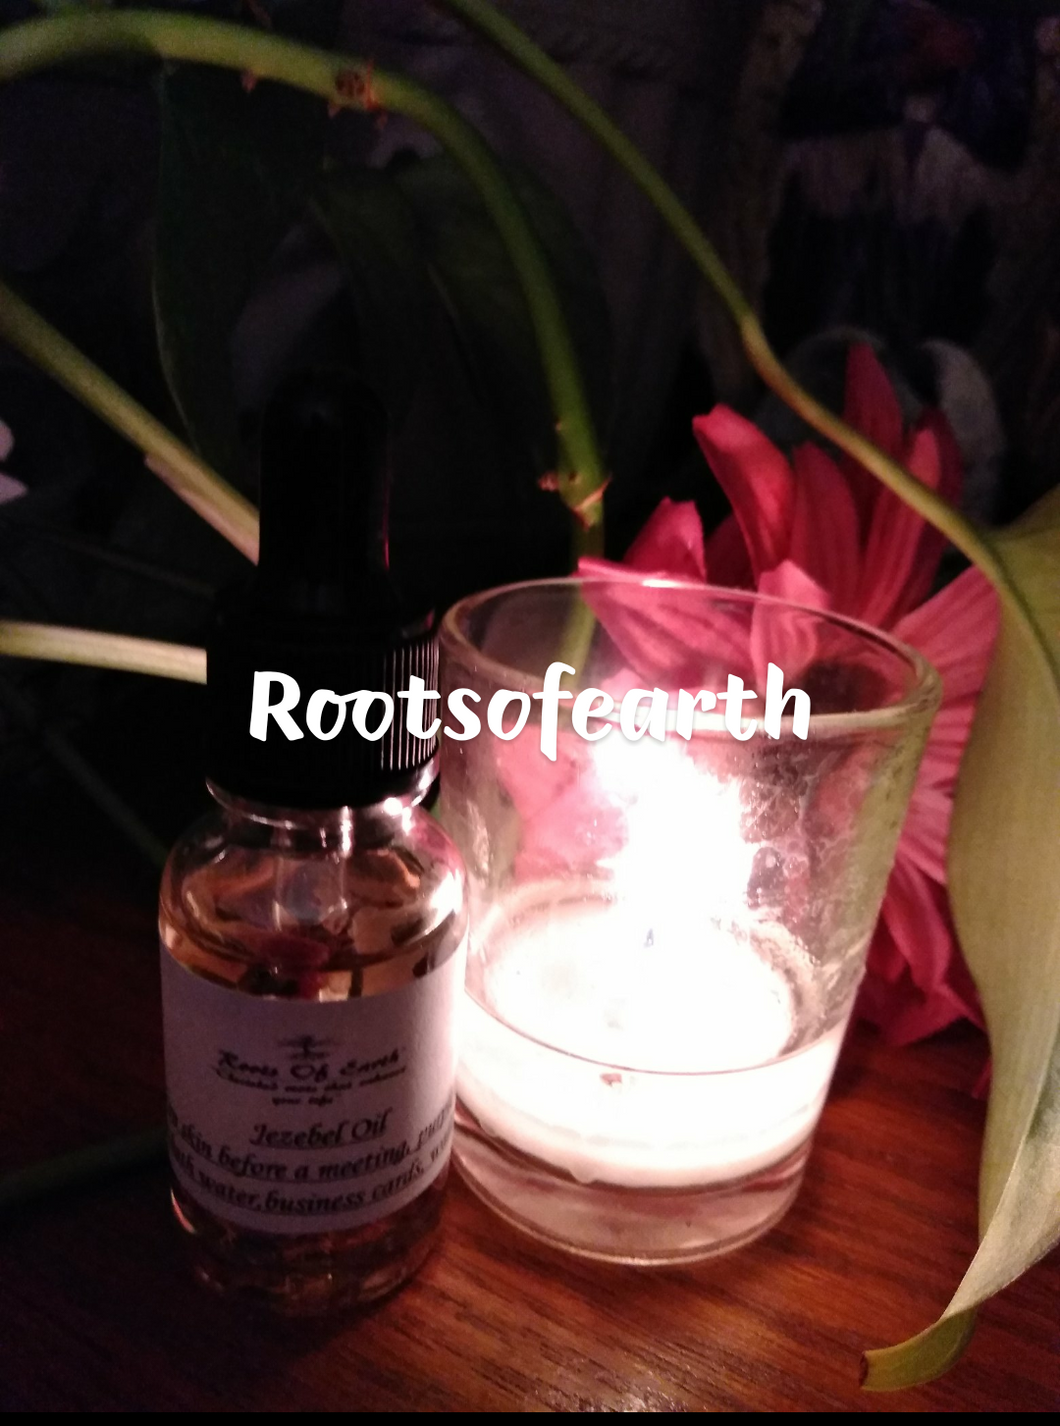 JEZEBEL OIL FOR ATTRACTING WEALTHY MEN BY ROOTS OF EARTH